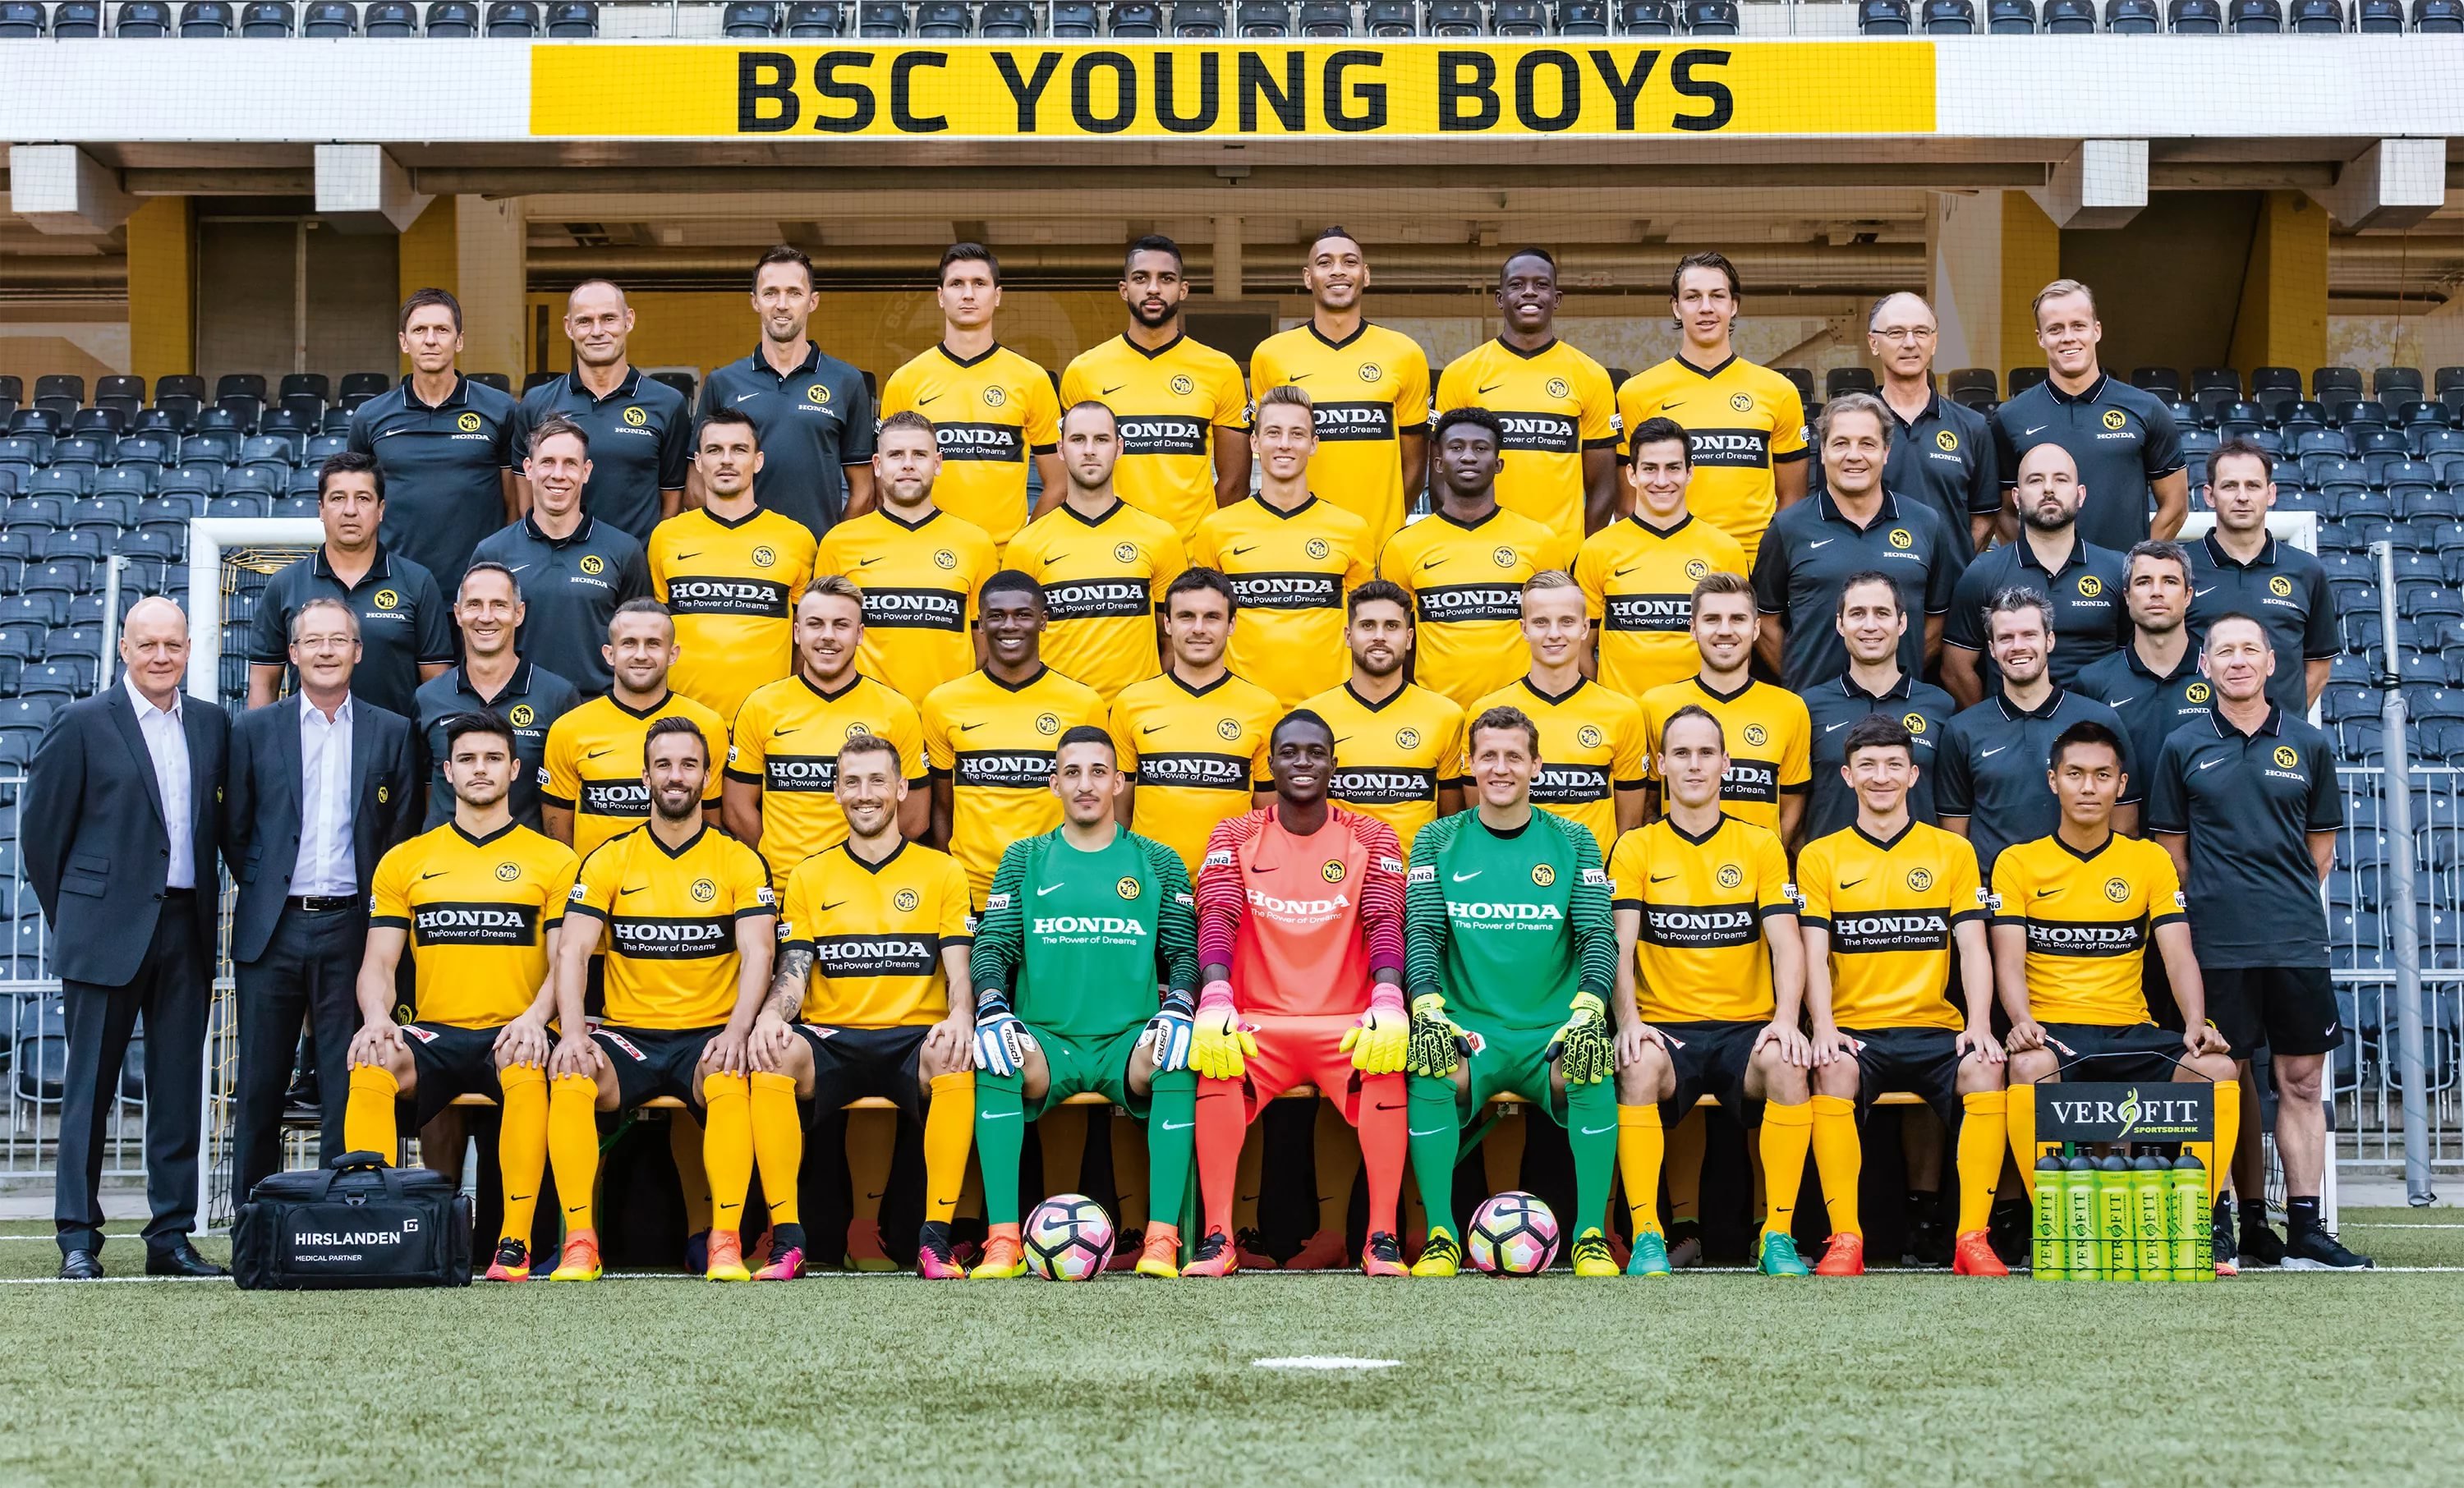 Bsc Young Boys Wallpaper Widescreen Image Photo Picture